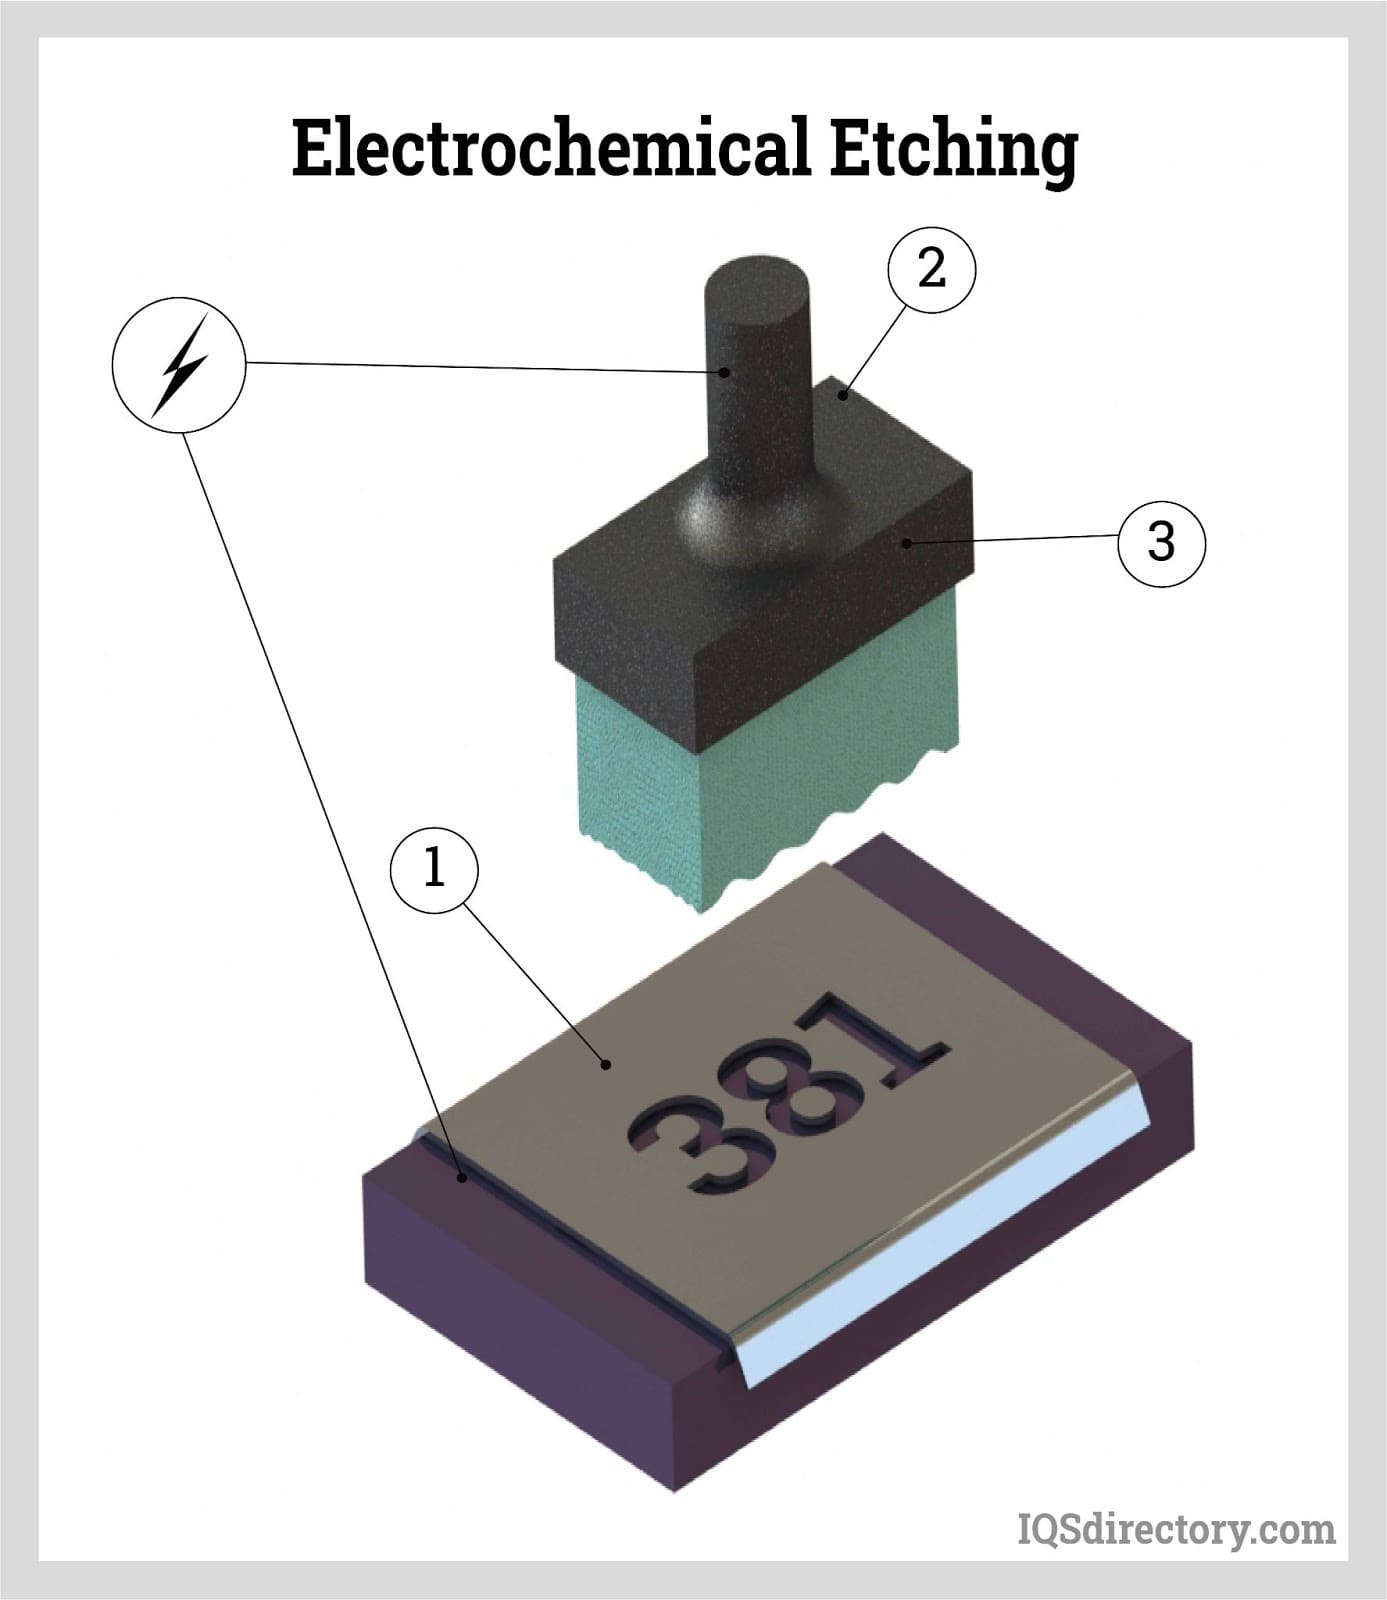 Electrochemical Etching